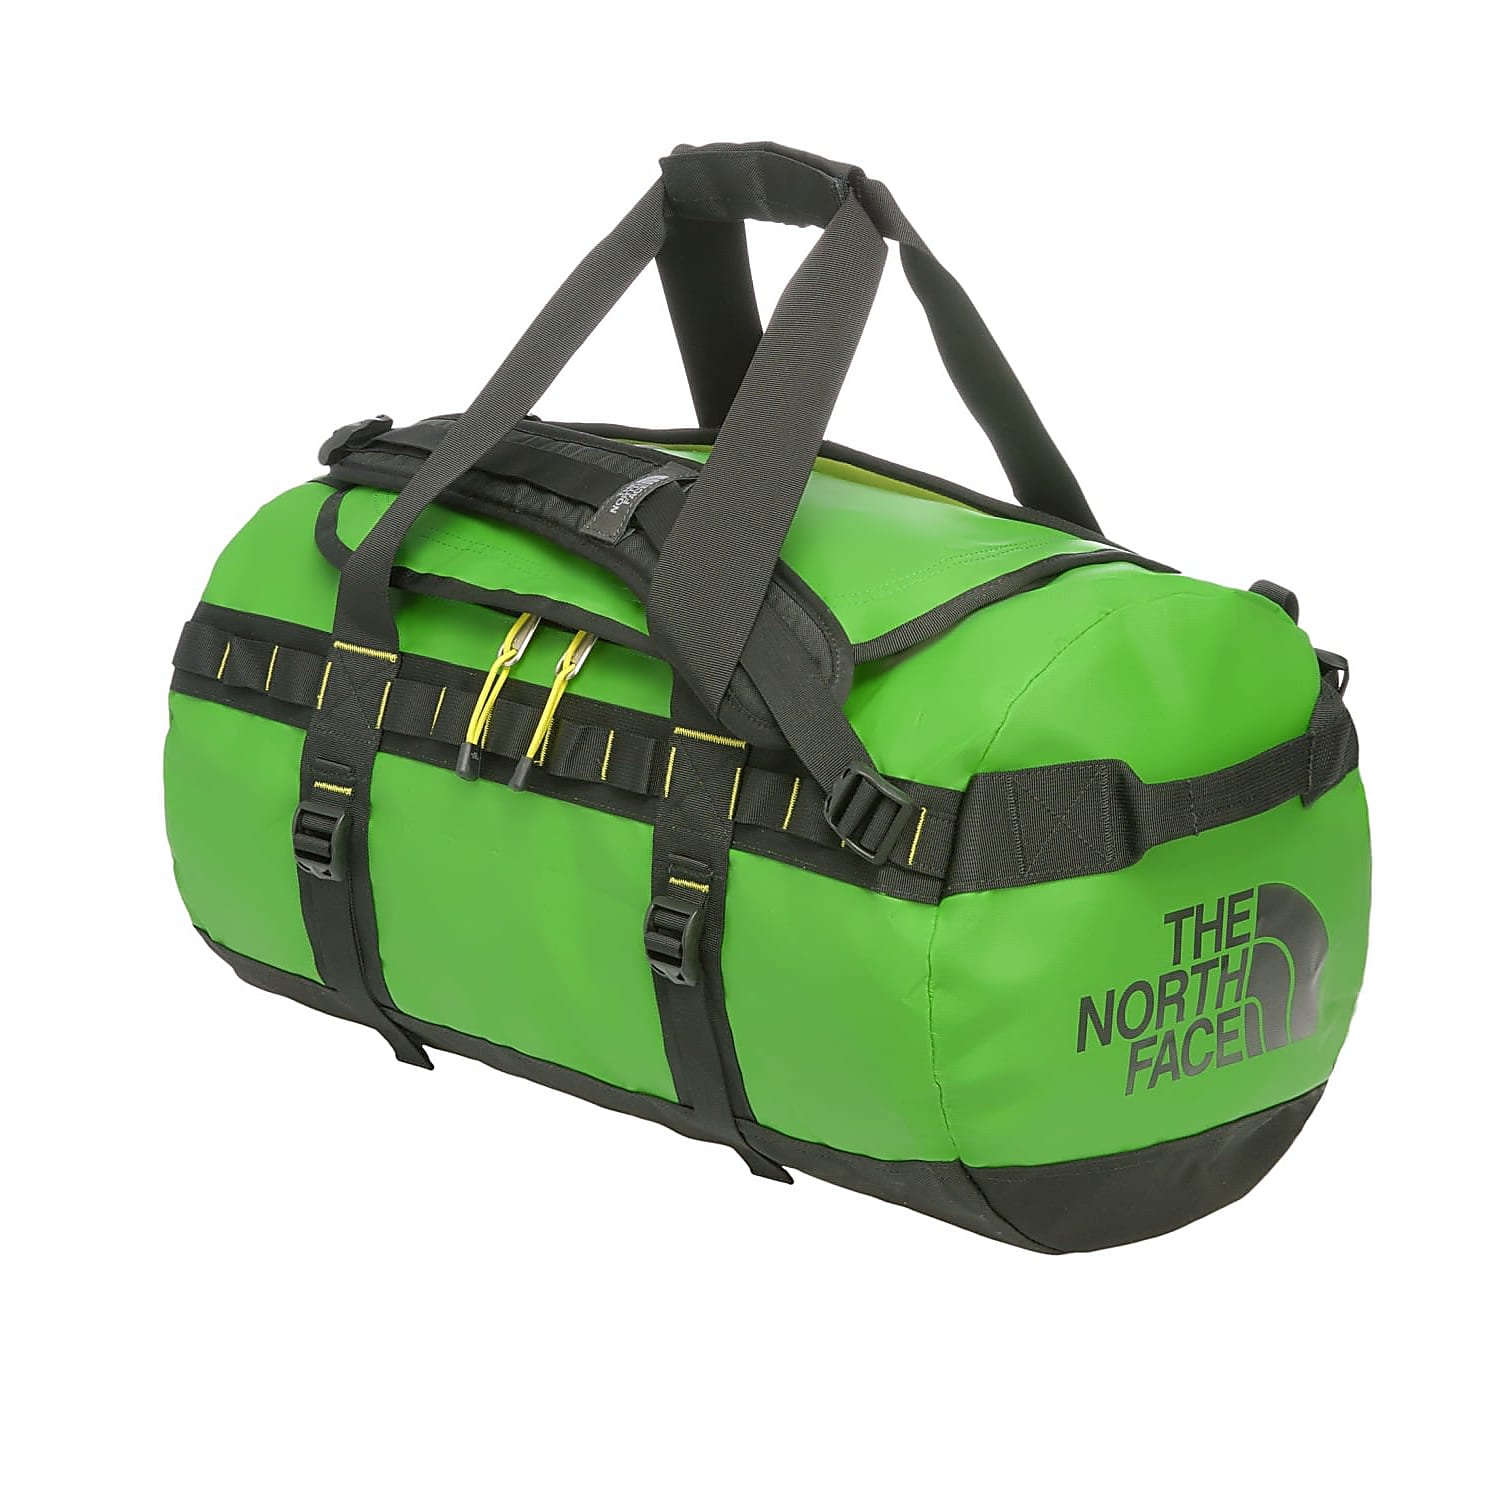 Face camp. Баул the North face Base Camp Duffel - s. Сумка Base Camp Duffel s хаки. The North face Duffel Bag s. Баул the North face Base Camp Duffel XL.